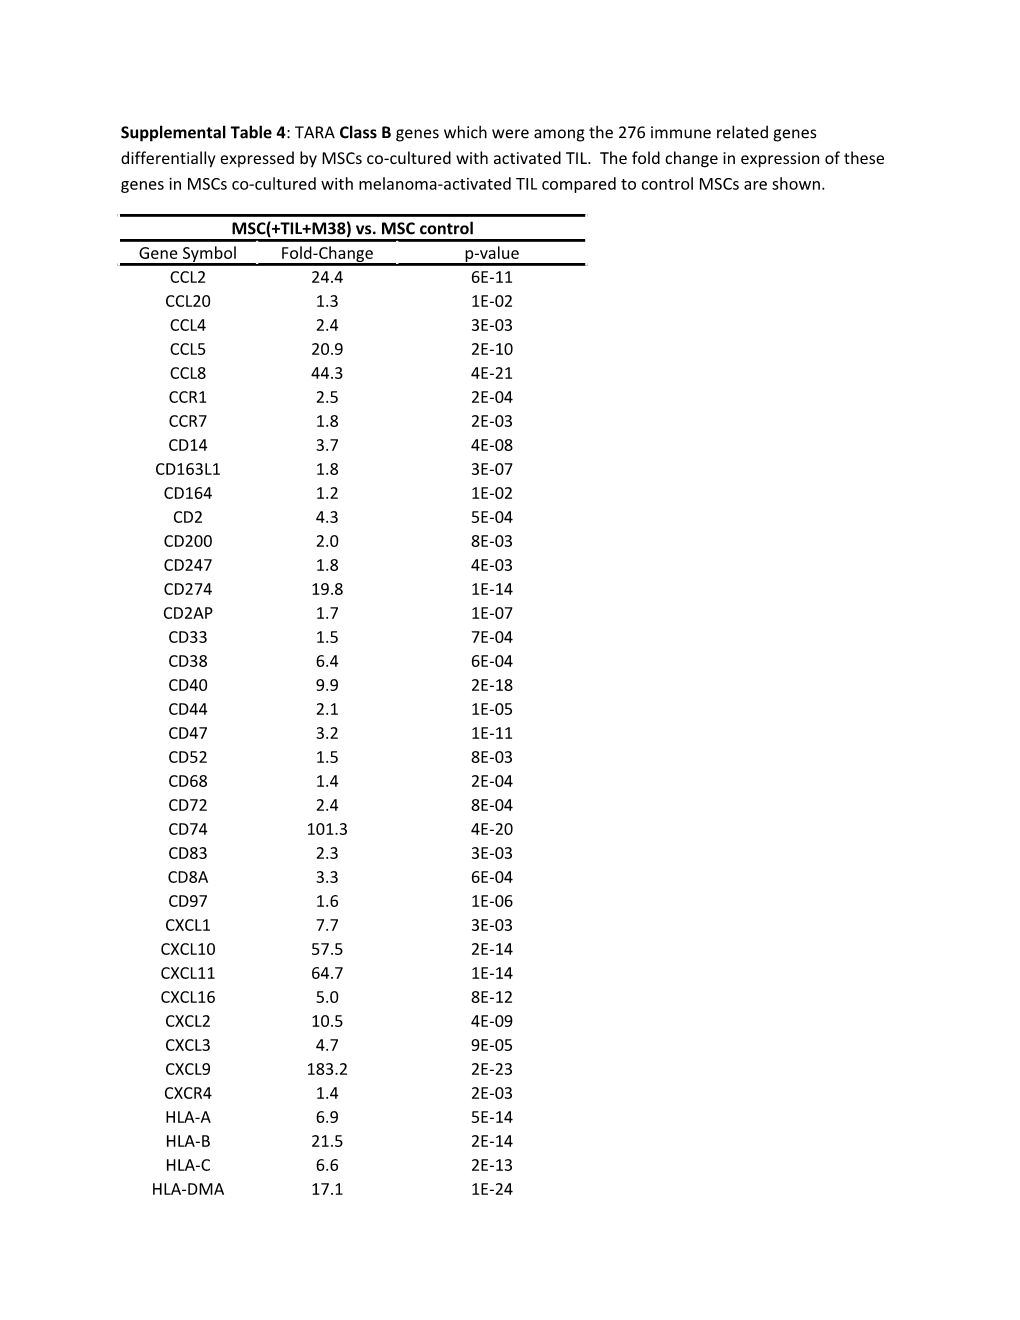 Supplemental Table 4: TARA Class B Genes Which Were Among the 276 Immune Related Genes